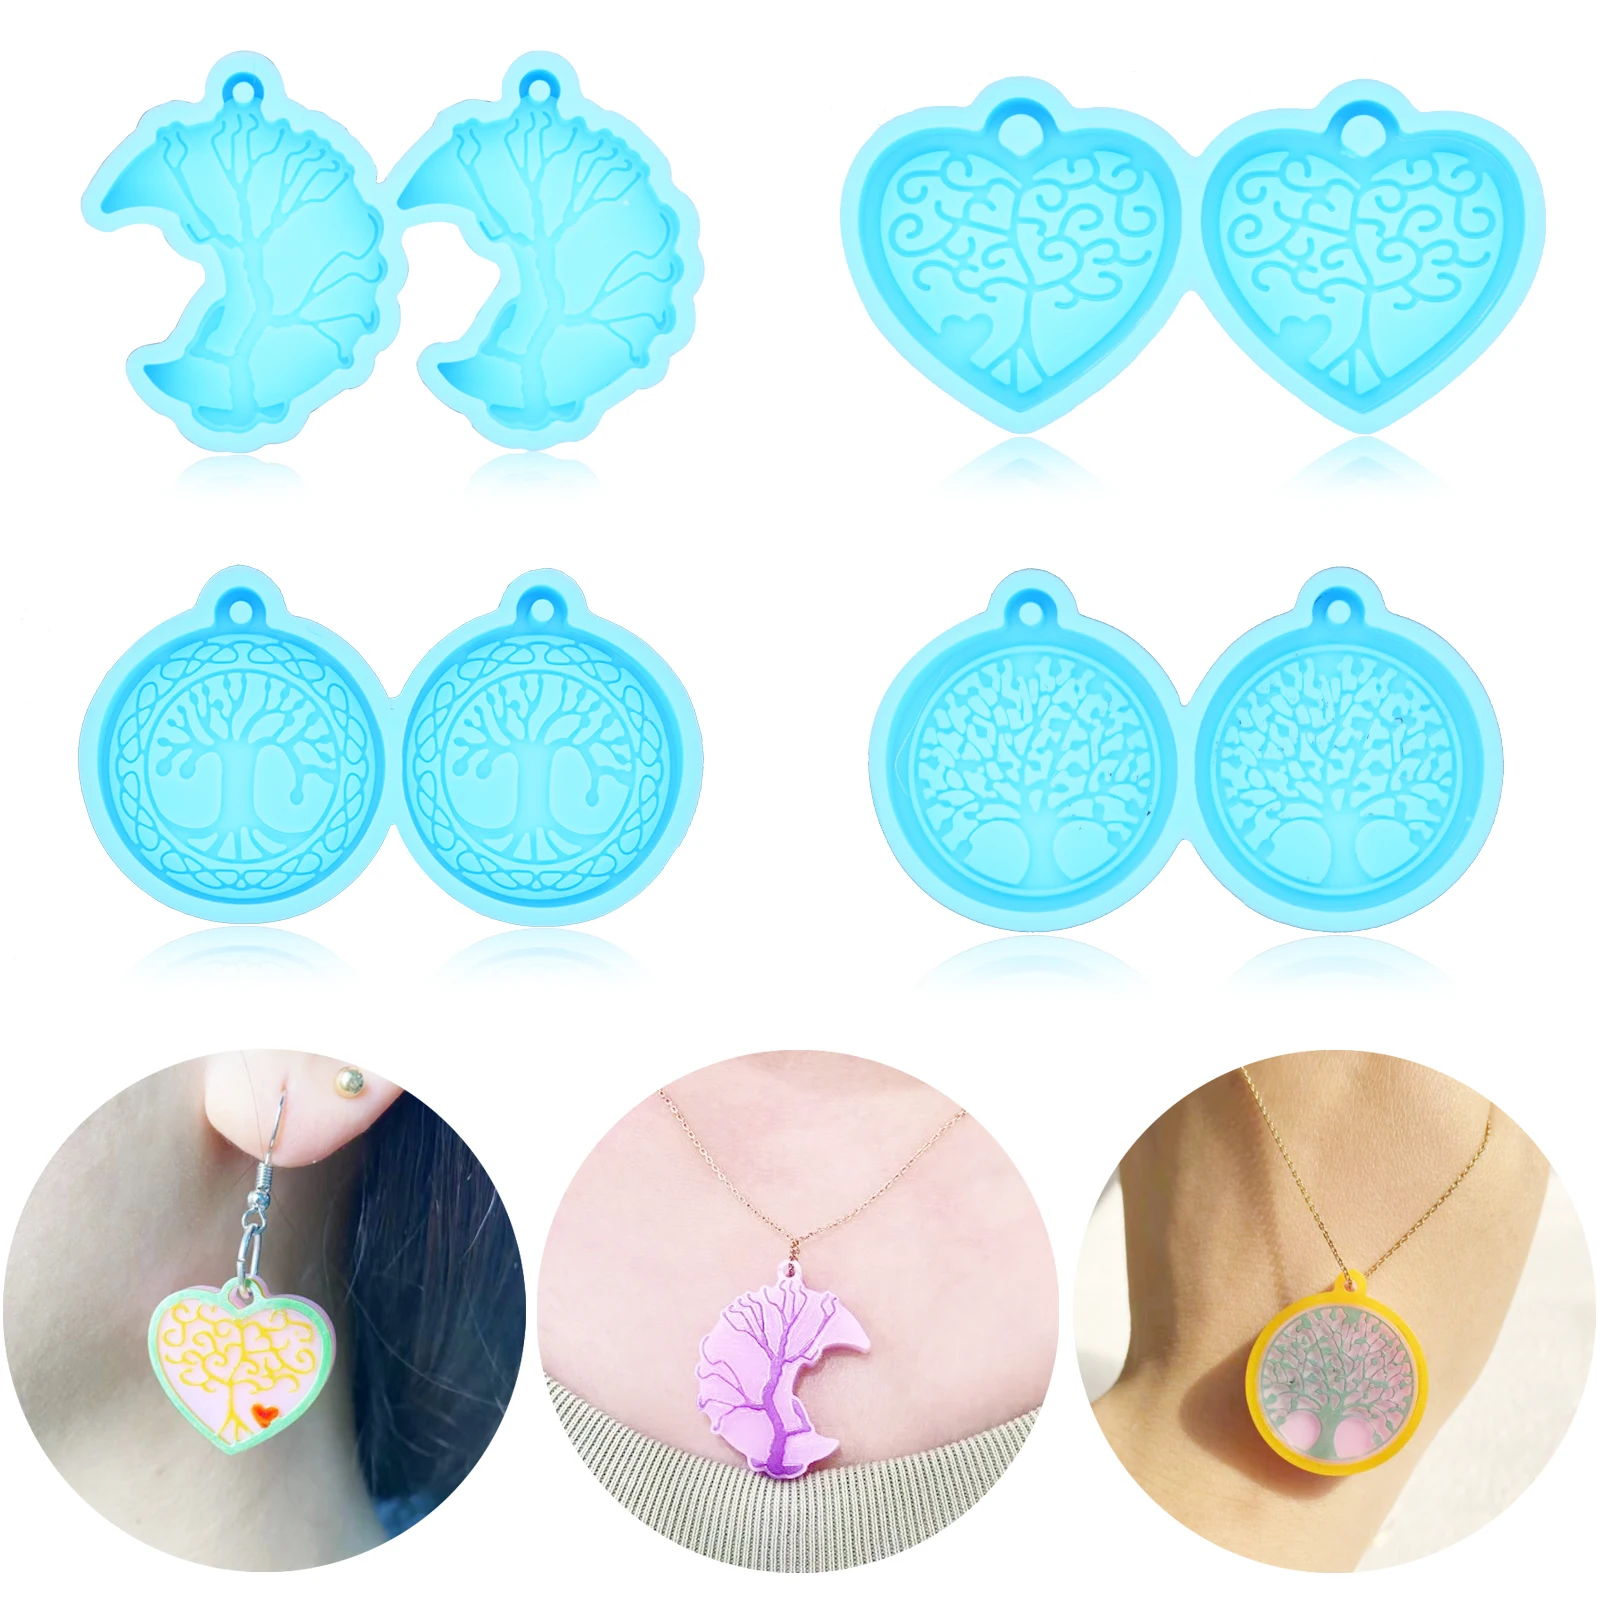 New Round Heart Earrings UV Resin Mold Tree of Life Necklace Keychain Pendant Epoxy Silicone Mold DIY Jewerly Making Supplies